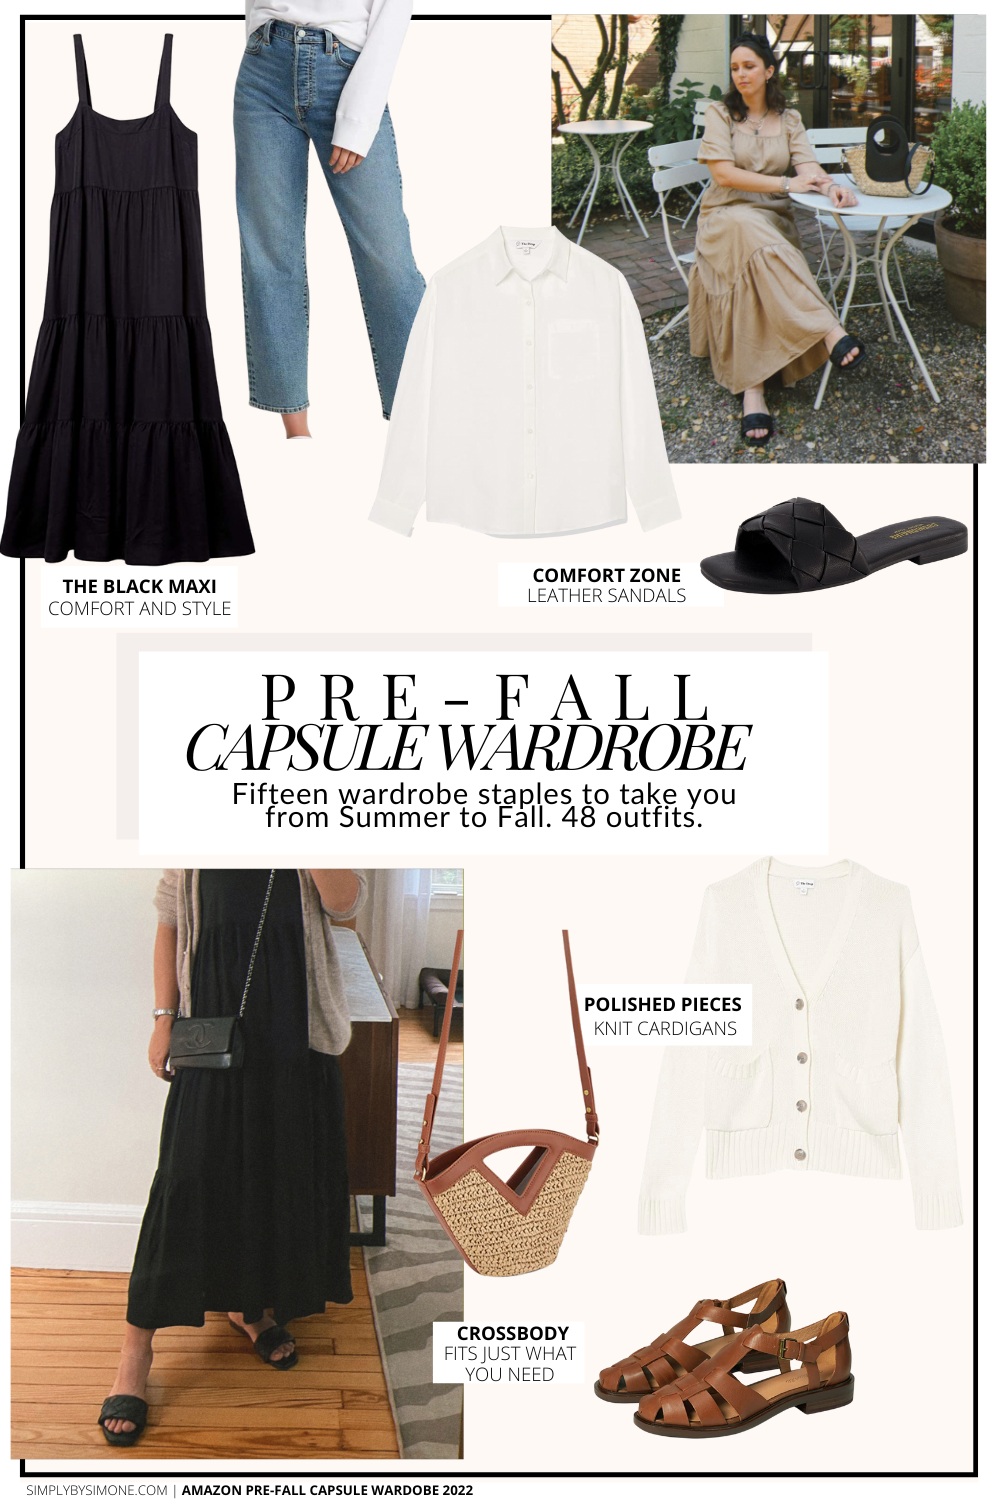 Affordable Amazon Pre-Fall Capsule Wardrobe | 15 Pieces, 48 Outfits | How to Build a Capsule Wardrobe | Amazon Fall Clothes | Outfit Inspiration | 48 Pre-Fall Weather Outfit Ideas | Fall Vacation Packing Guide | Amazon Pre-Fall Capsule Wardrobe - What To Wear This Fall 2022 | Parisian Outfit Ideas | Cover Image | Simply by Simone